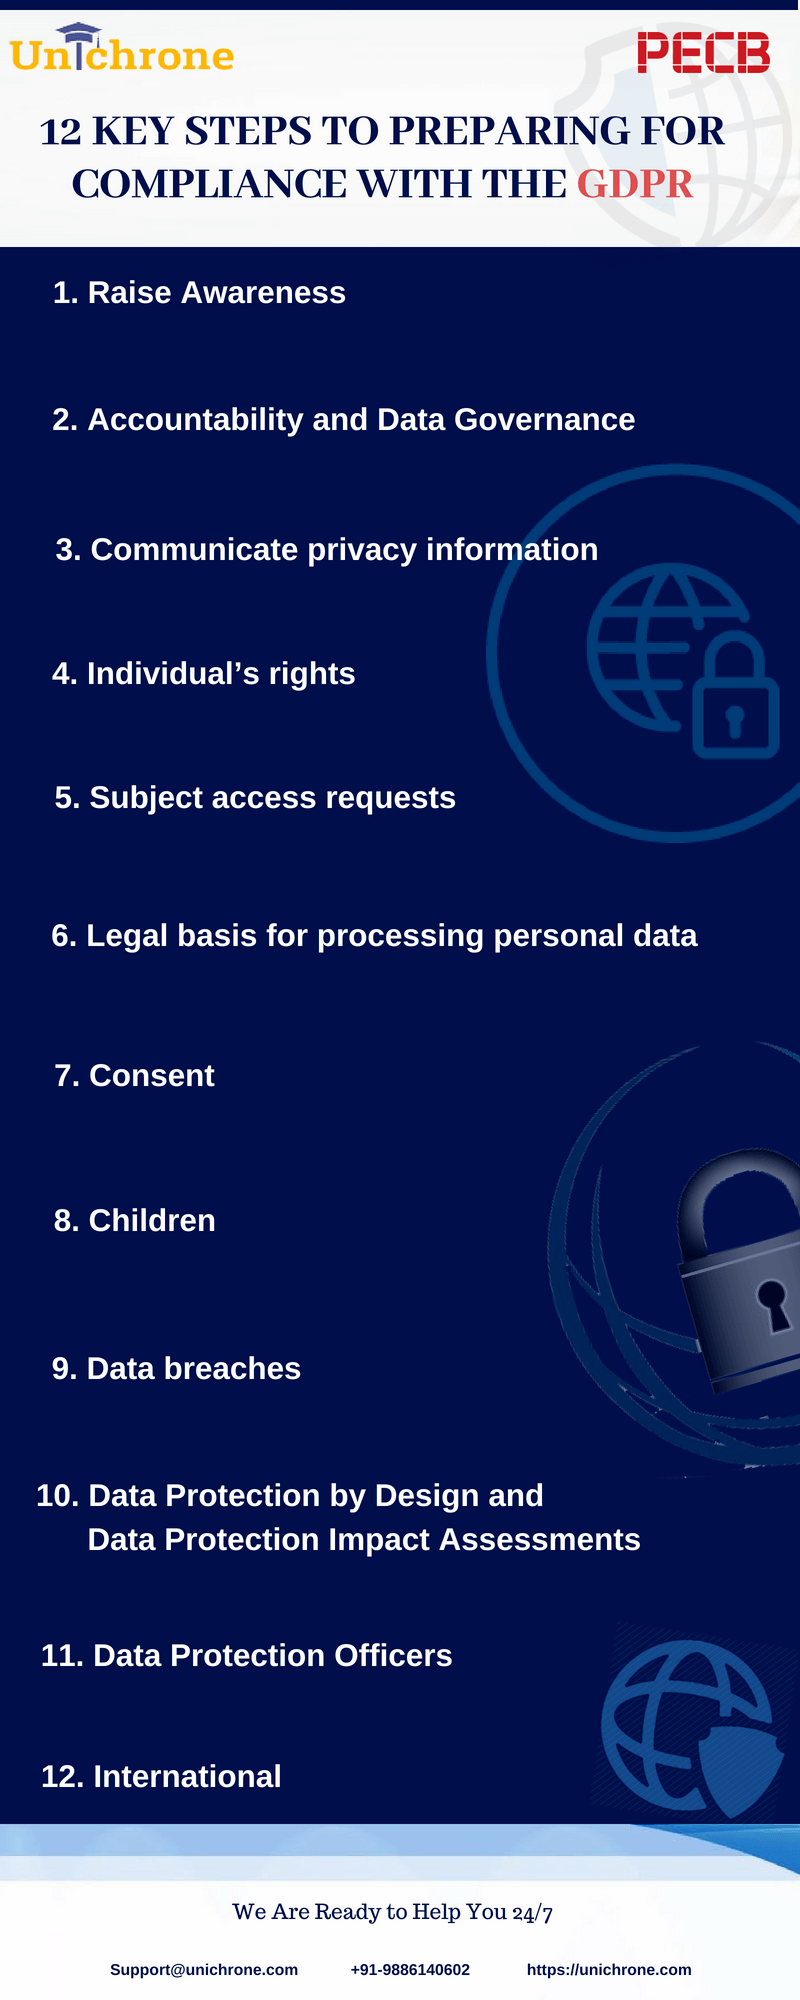 Top 12 Key Steps To Get Preparing For GDPR Infographic